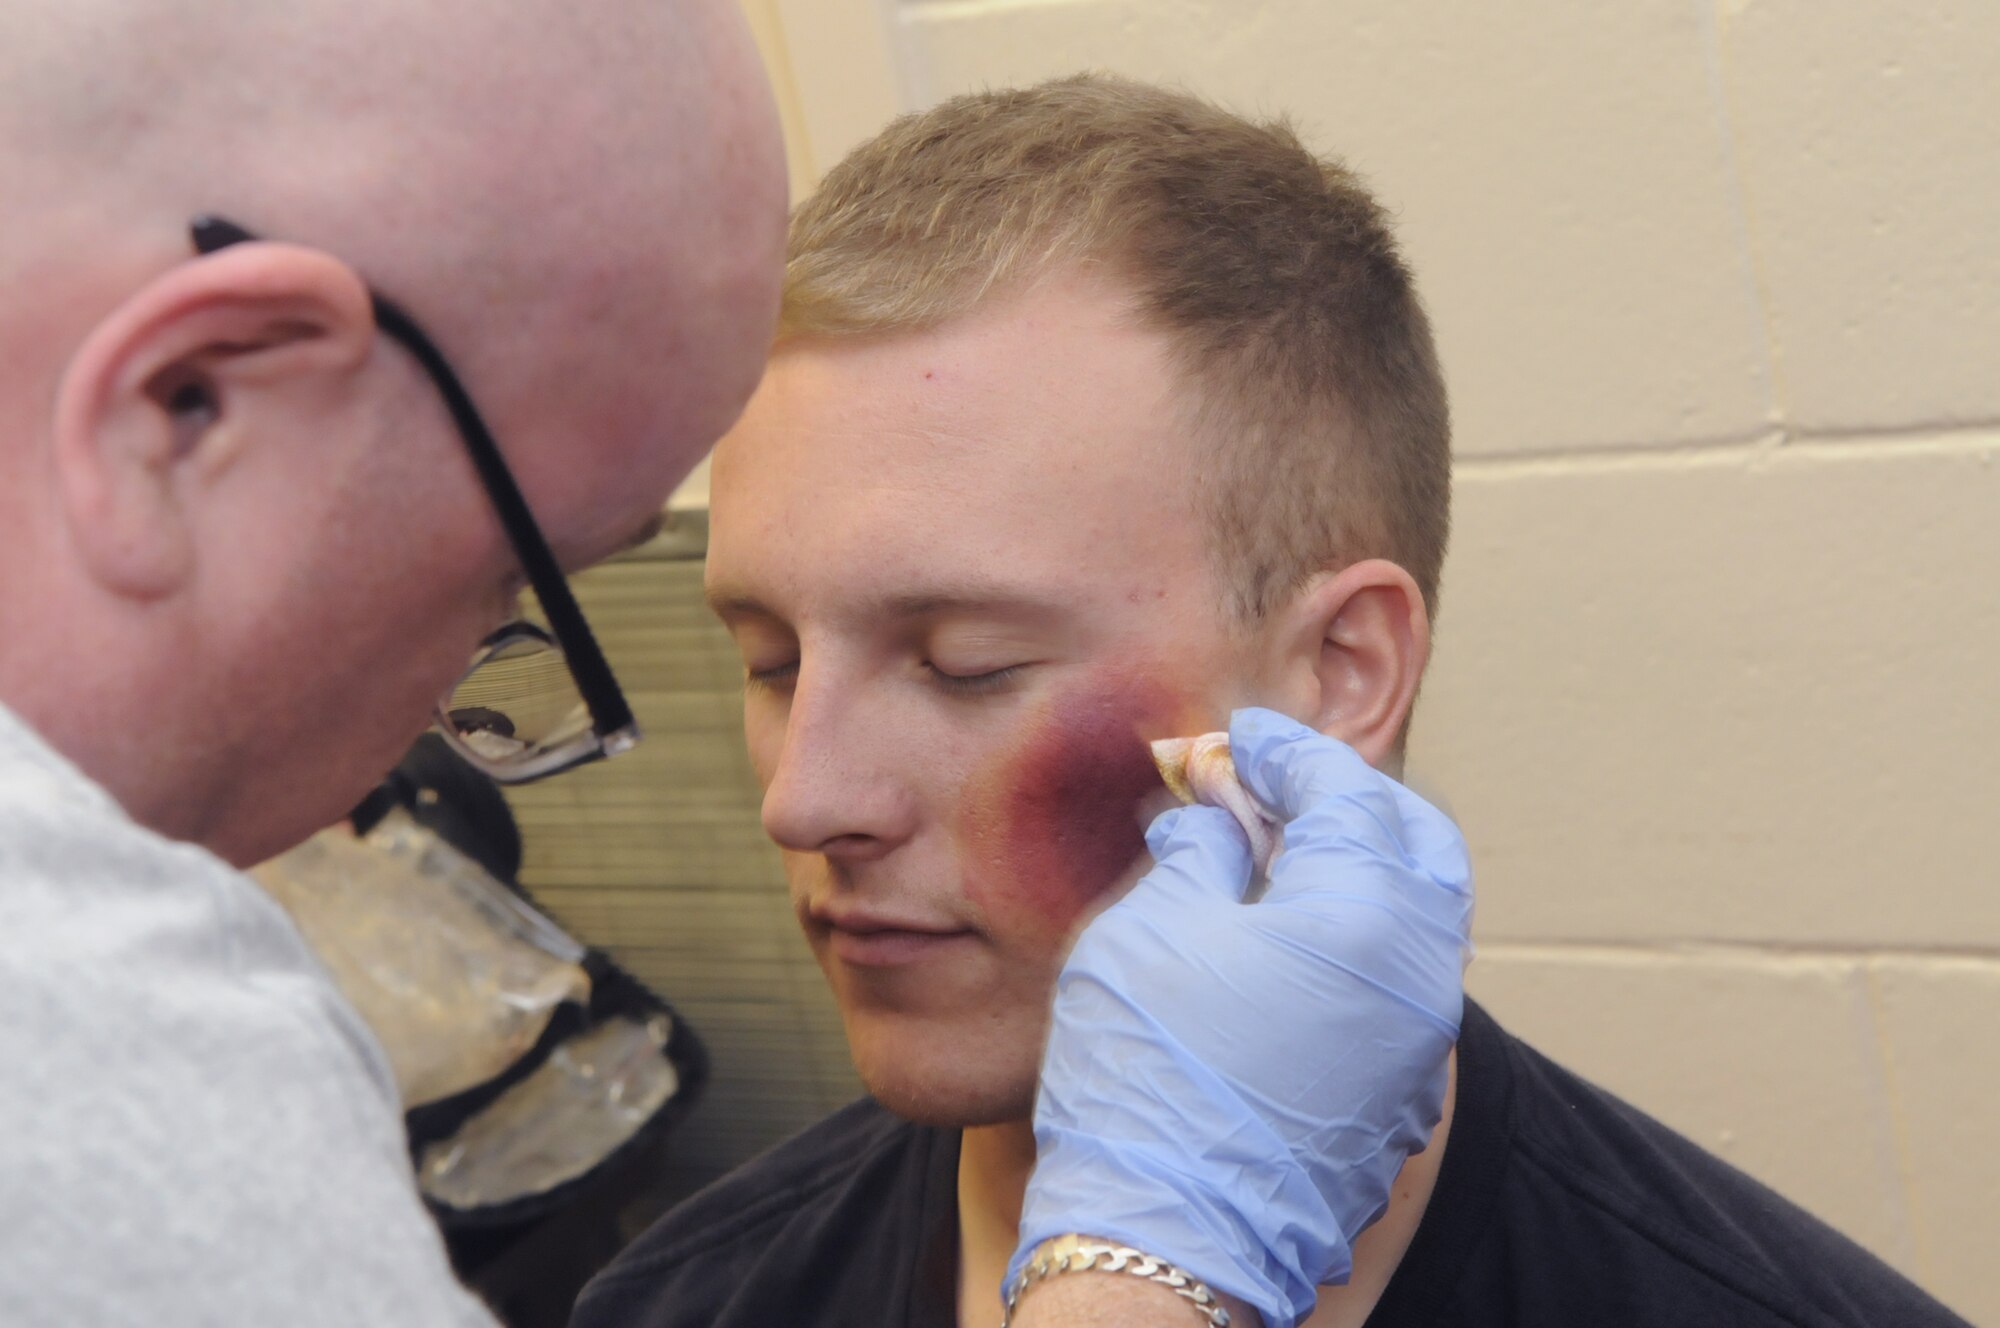 SSgt. Robert Mayner has make-up applied to simulate injuries for an exercise for the Medical Center of Central Georgia. U. S. Air Force photo by Sue Sapp